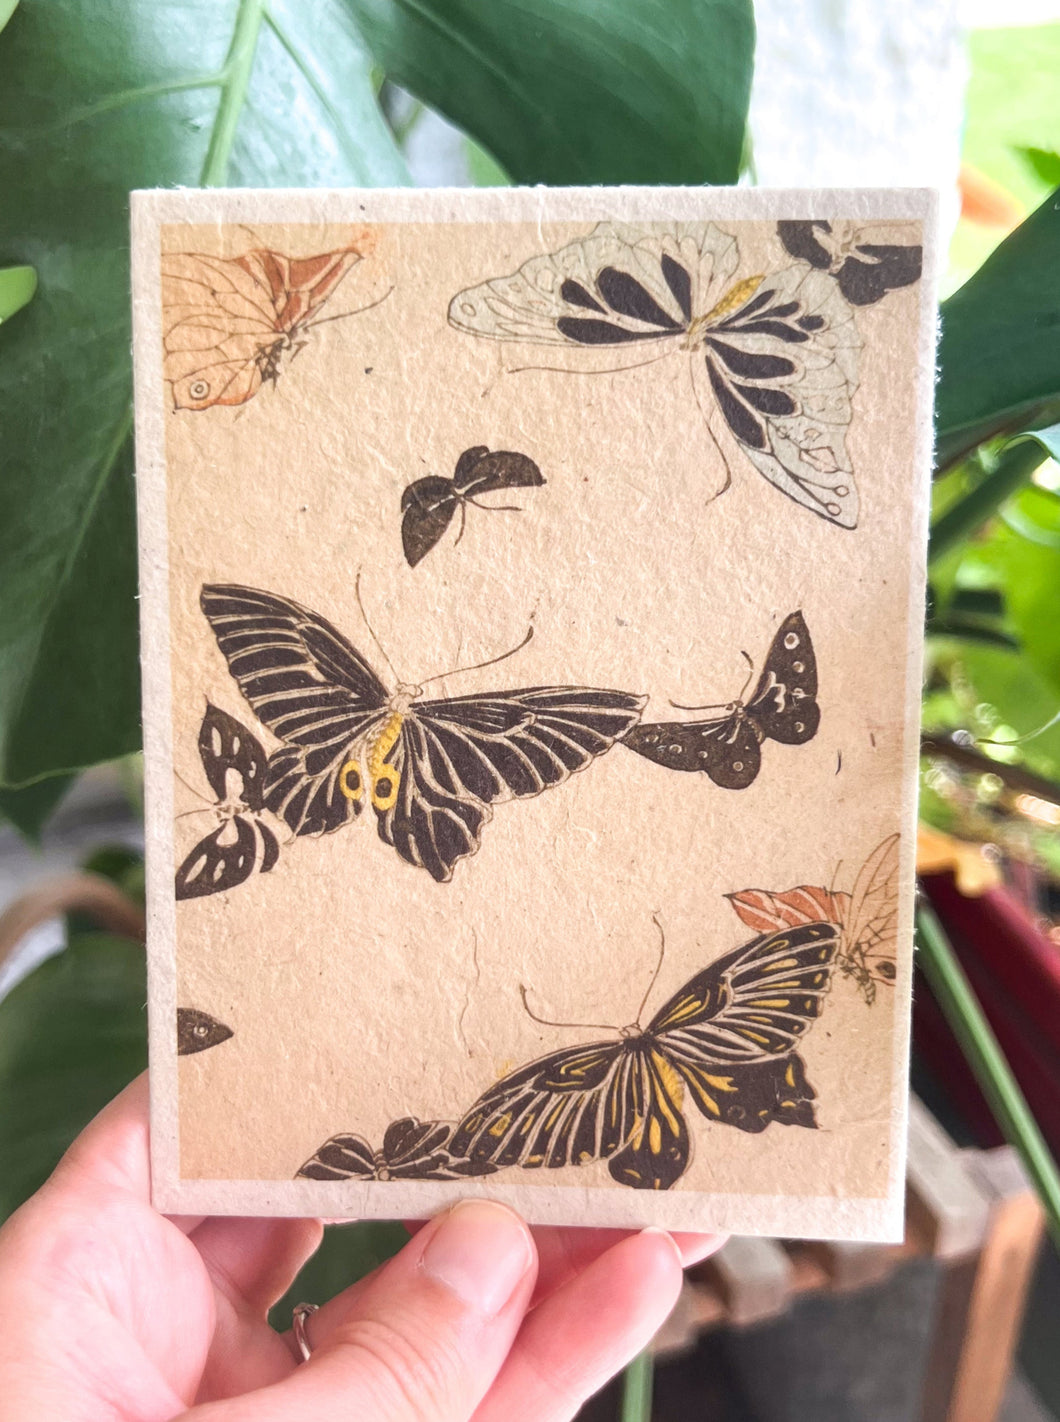 Japanese Plantable Seed Card || Zero Waste || Supports Women || Eco-friendly || J48